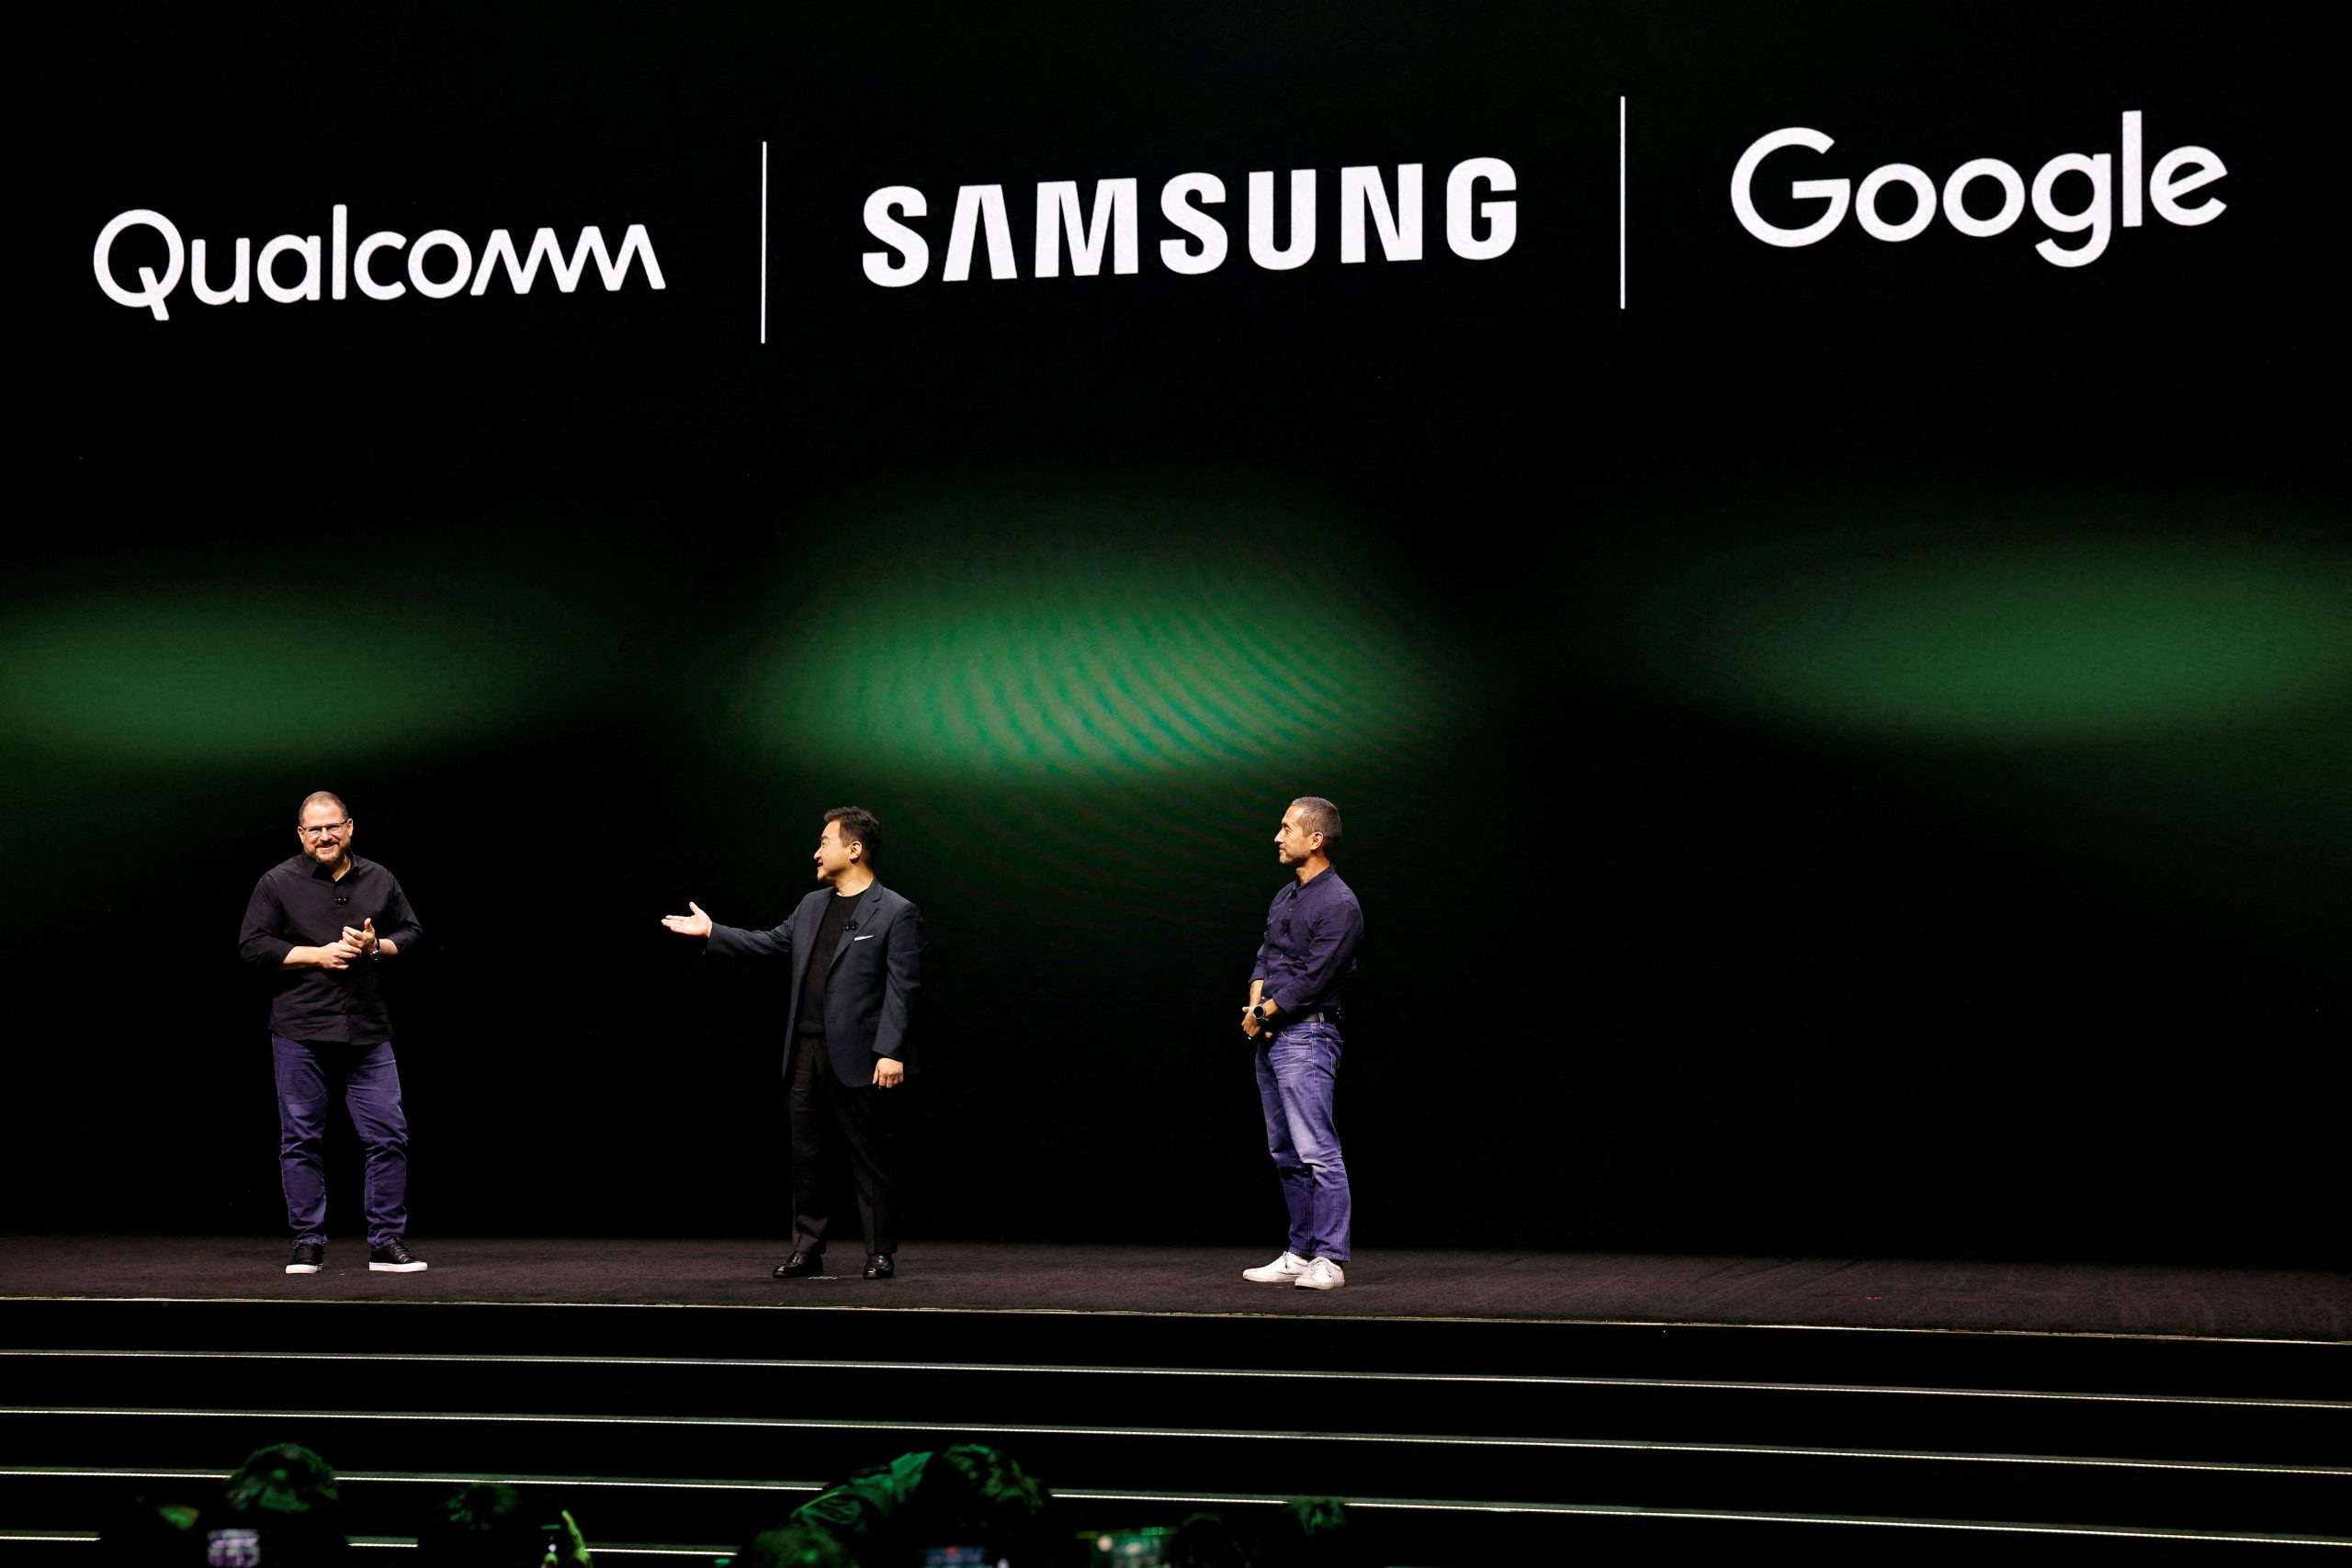 TM Roh, President and Head of Mobile eXperience Business at Samsung Electronics, Cristiano Amon, President  and  CEO Qualcomm Incorporated, and Hiroshi Lockheimer, SVP, Platforms  and  Ecosystems at Google, stand on stage as Samsung Electronics unveils its latest flagship smartphones in San Francisco, California, U.S. February 1, 2023. REUTERS/Peter DaSilva REFILE - CORRECTING ID | DeviceDaily.com